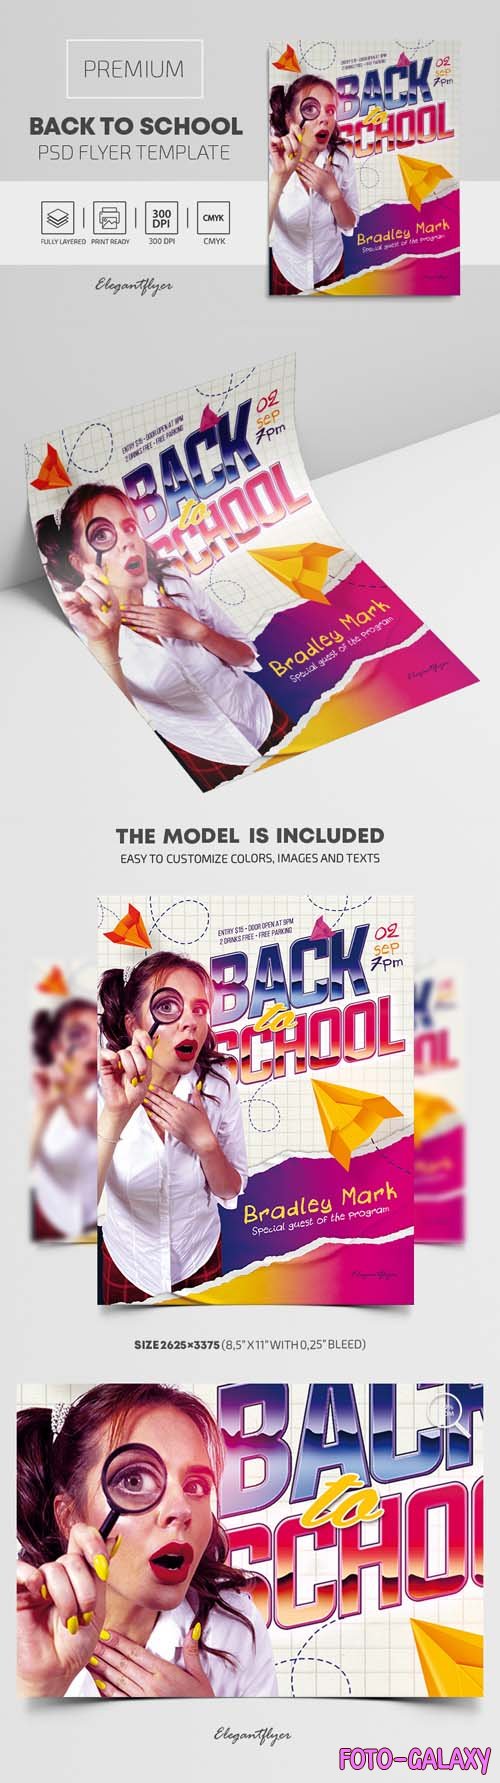 Back to School PSD Flyer